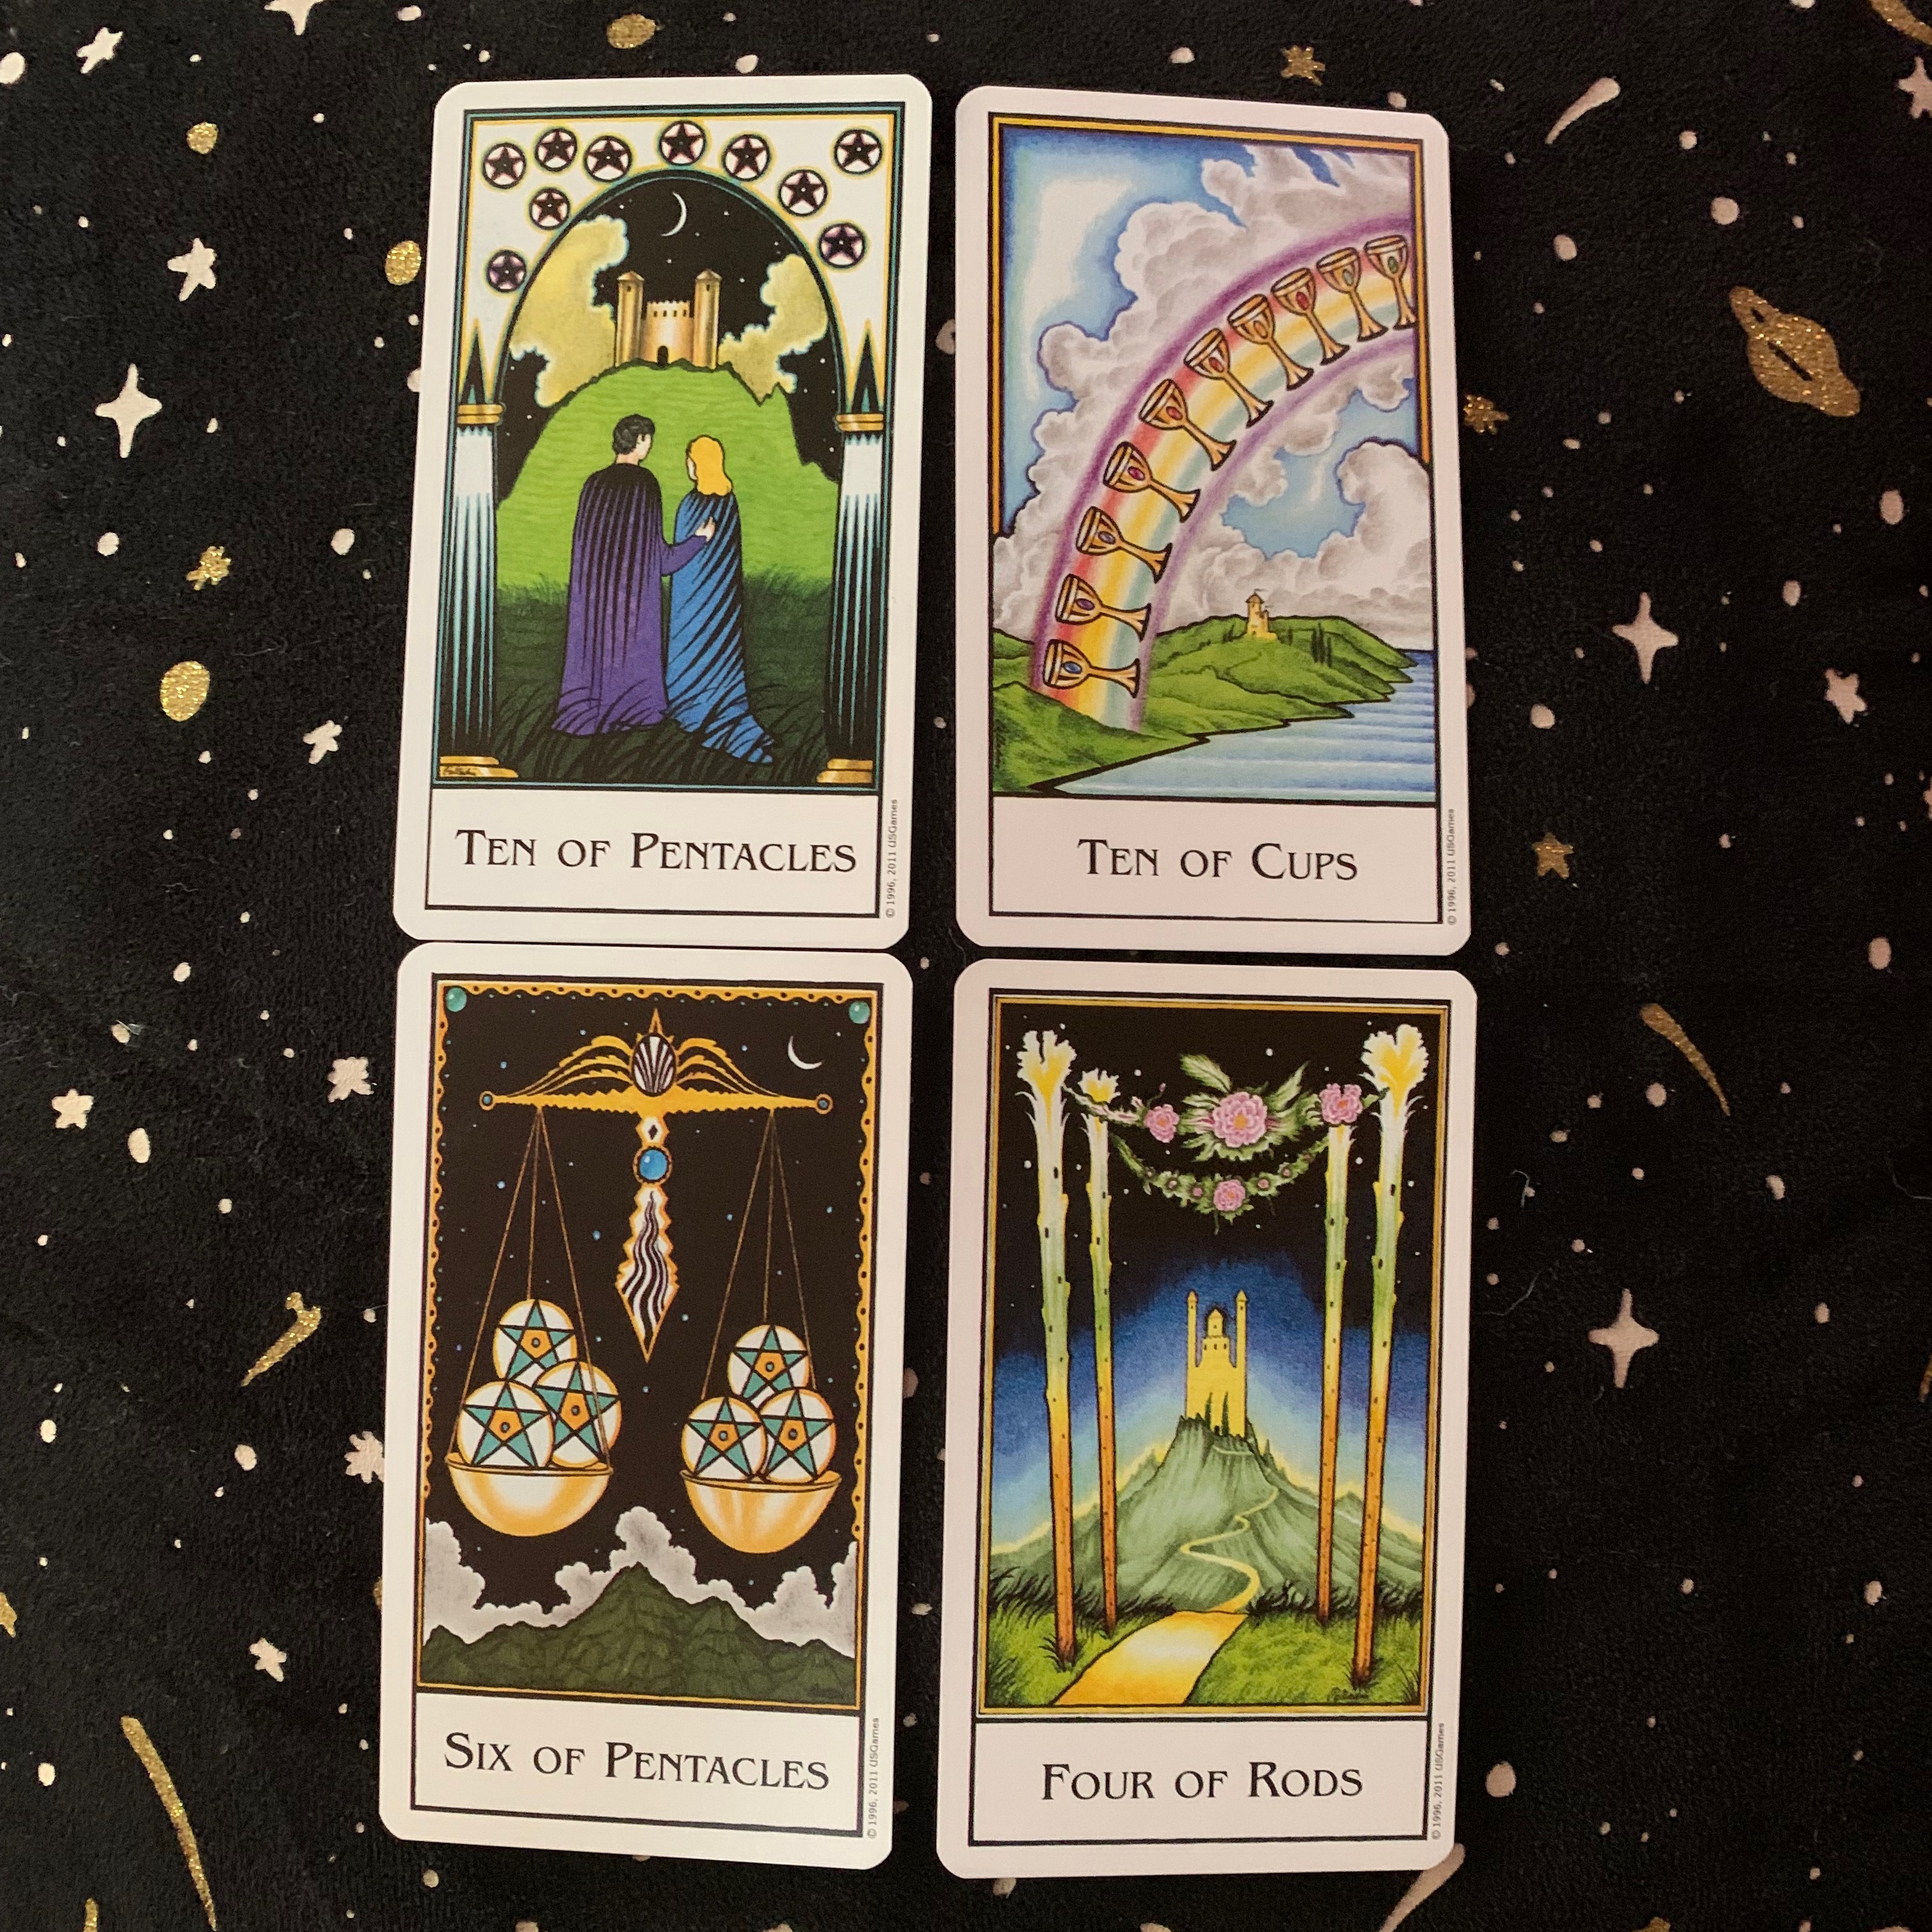 Selection of cards from the minor arcana of The New Palladini Tarot